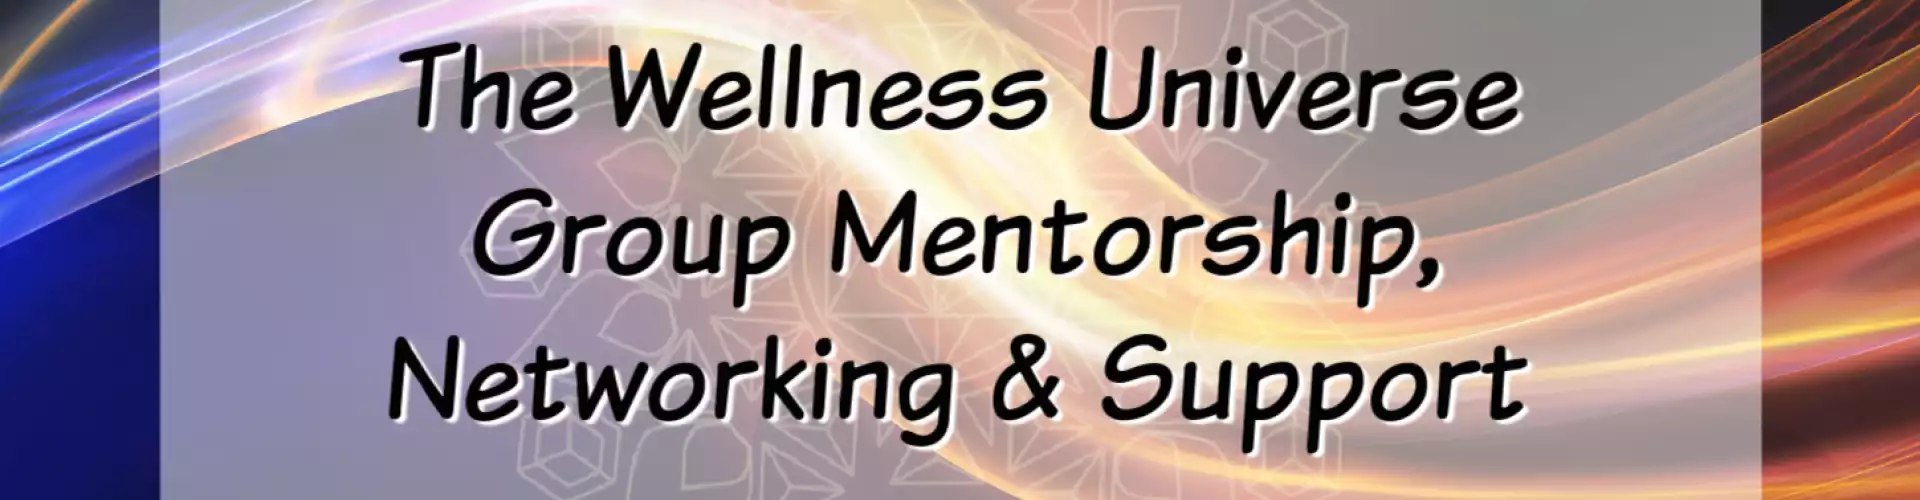 The Wellness Universe Mentorship, Networking & Support December